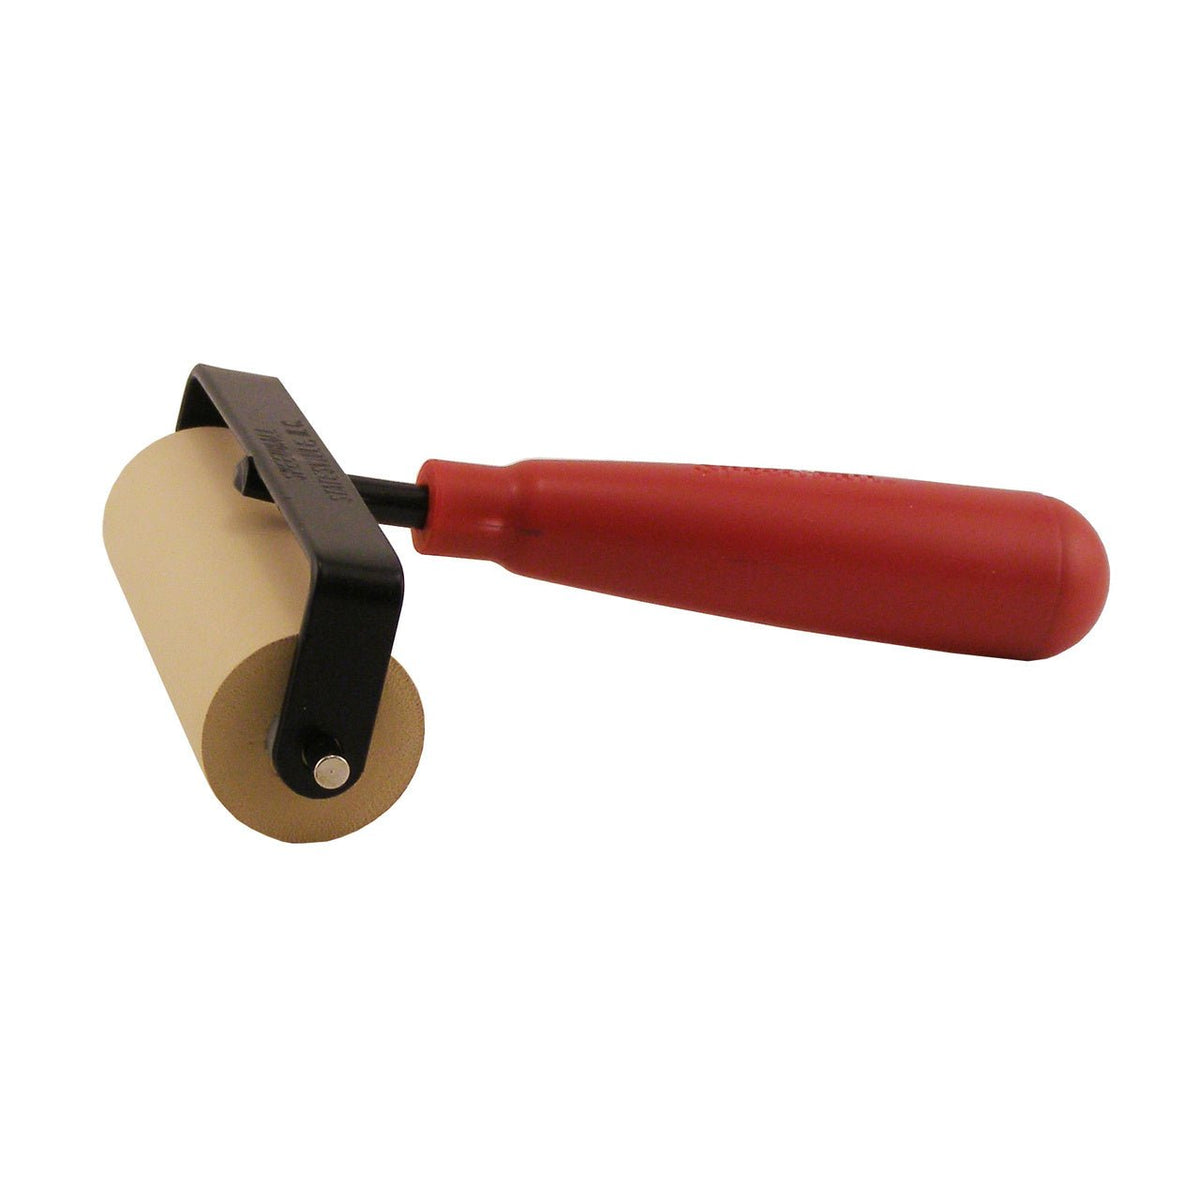 6 Inch Rubber Roller Brayer Tools for Printing Printmaking Ink Stamping,  Red - Red, Wood Color